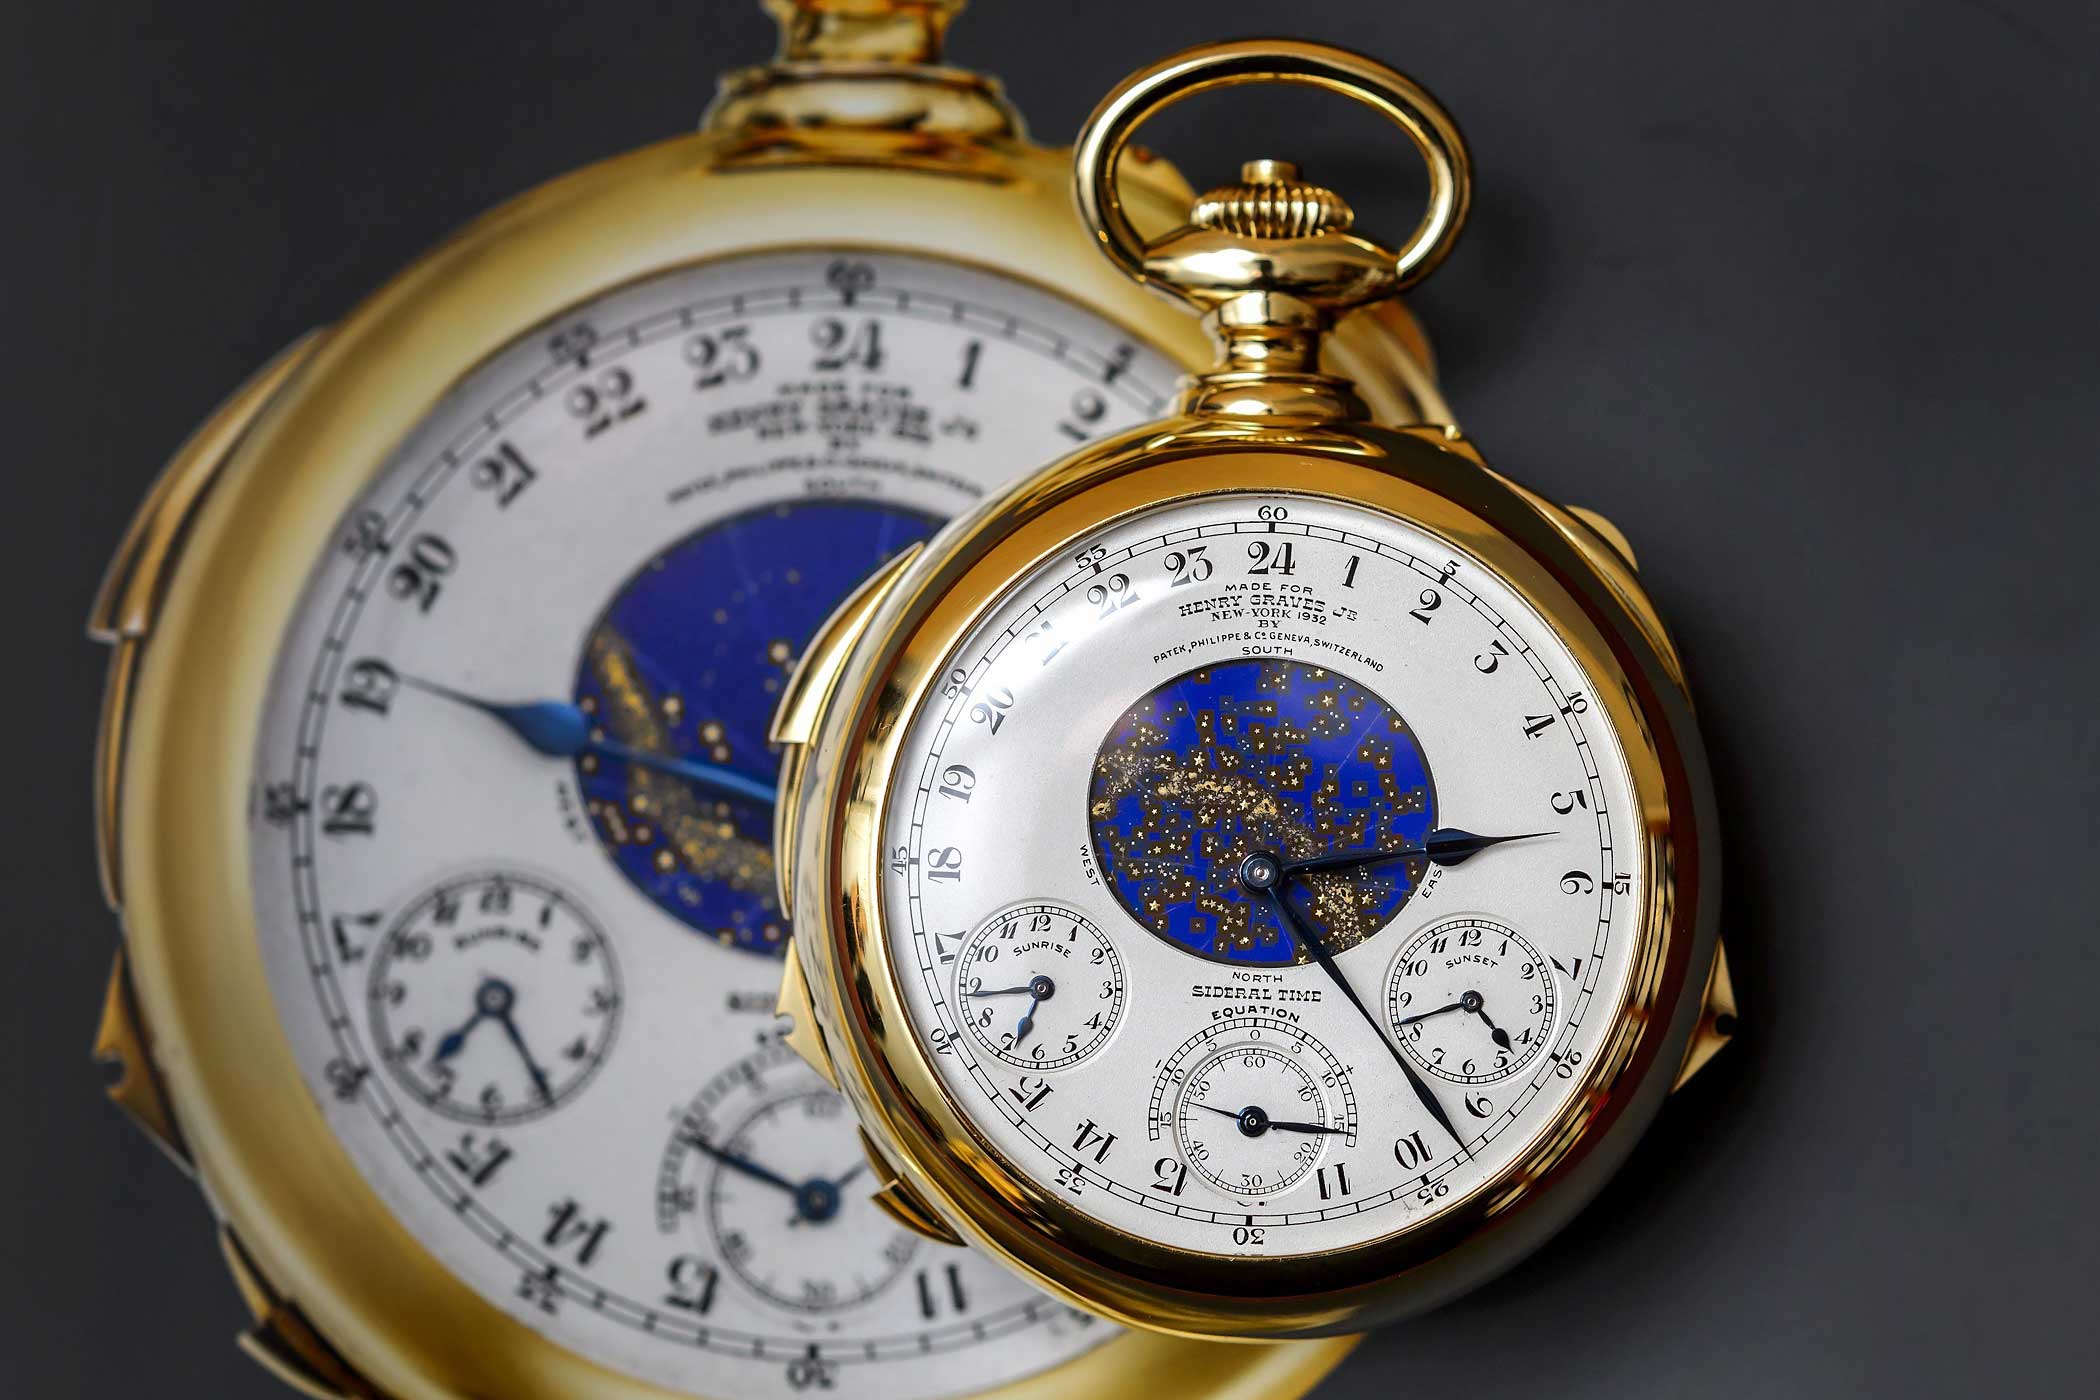 The Henry Graves Supercomplication timepiece made by Swiss watchmaker Patek Philippe in 1932 is photographied during a press preview by Sotheby's auction house on November 5, 2014 in Geneva. (Fabrice Coffrini—AFP/Getty Images)